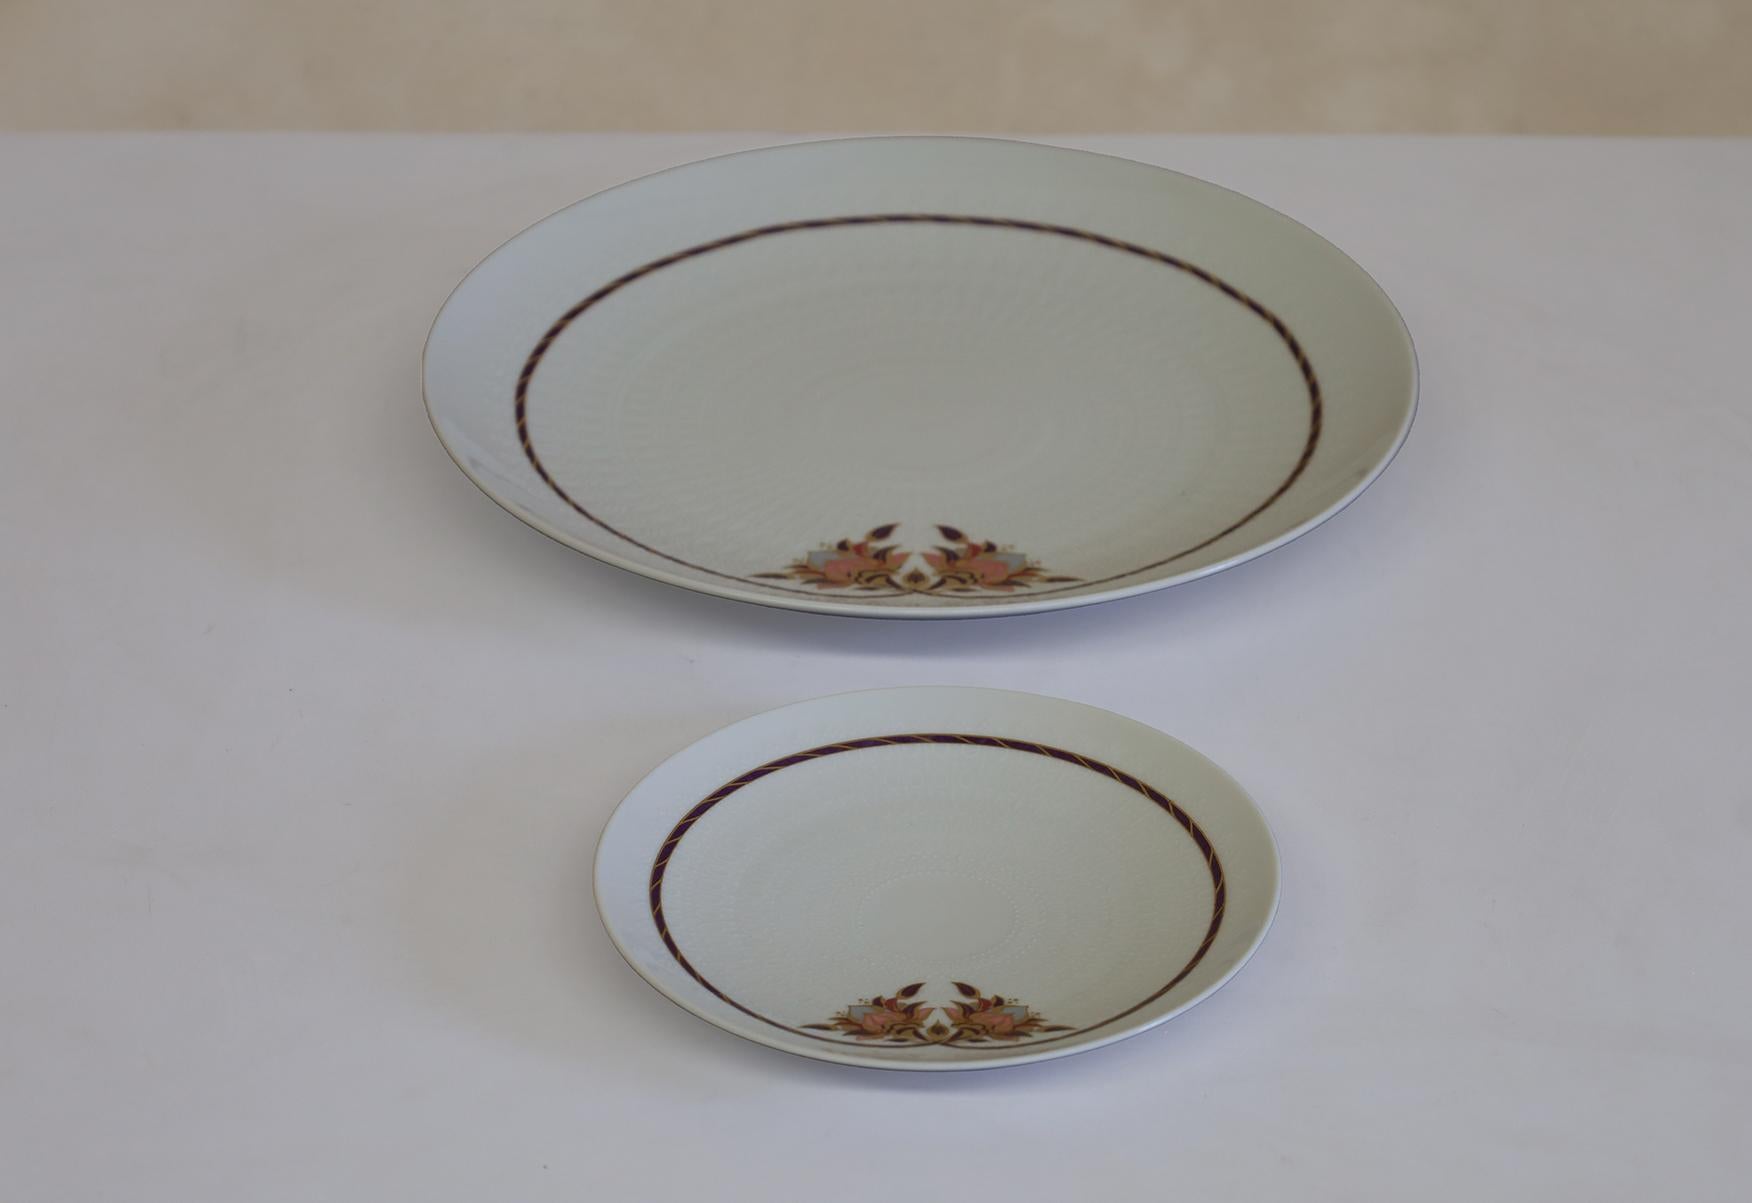 Set of 11 Porcelain Rosenthal Classic Rose Dessert Plate.
Perfect condition never used.
Very nice proportions and decoration. Also with a very nice texture, please see photos.